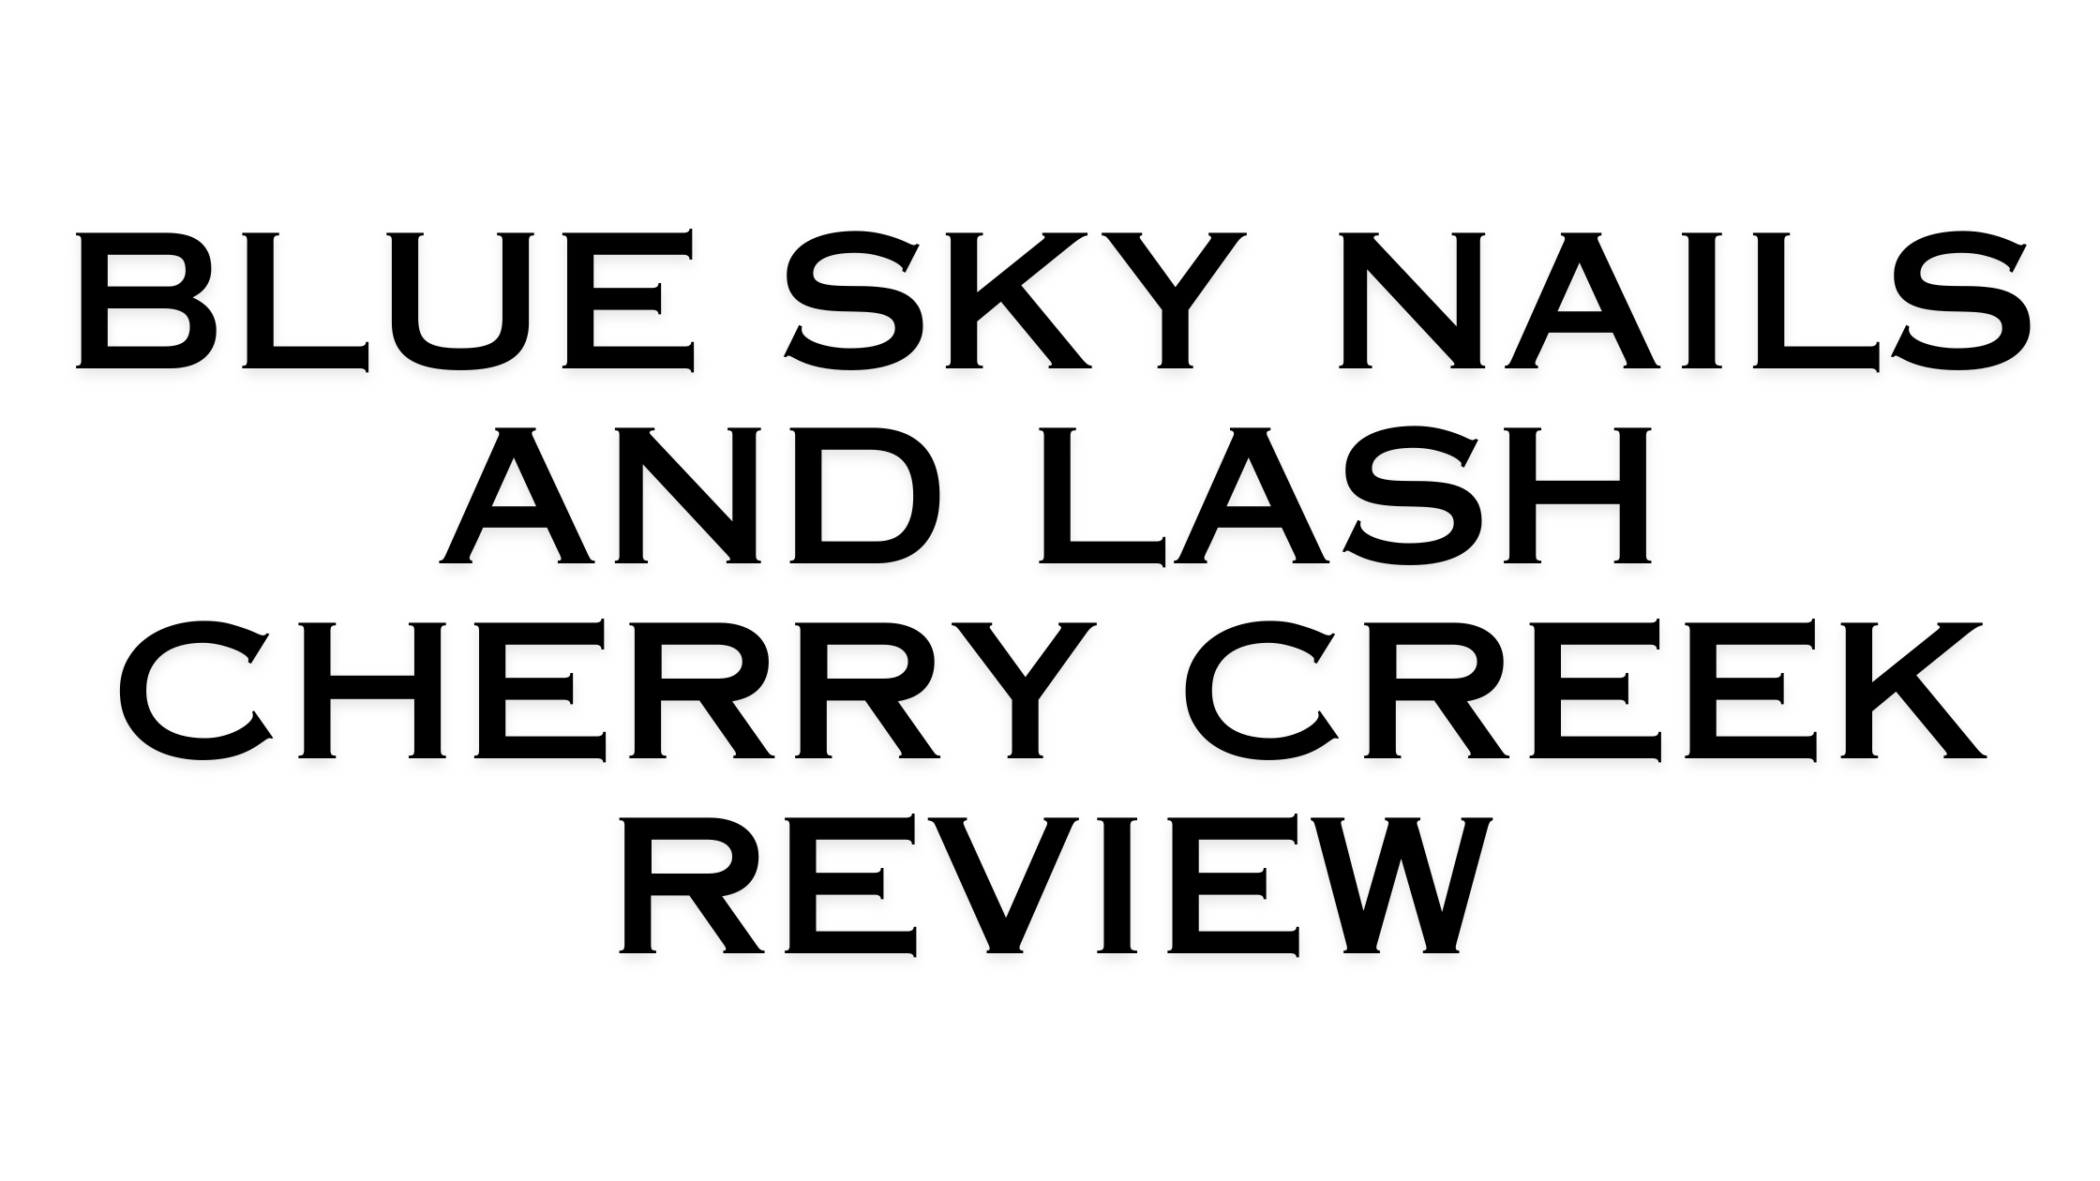 Blue Sky Nails and Lash Cherry Creek Review